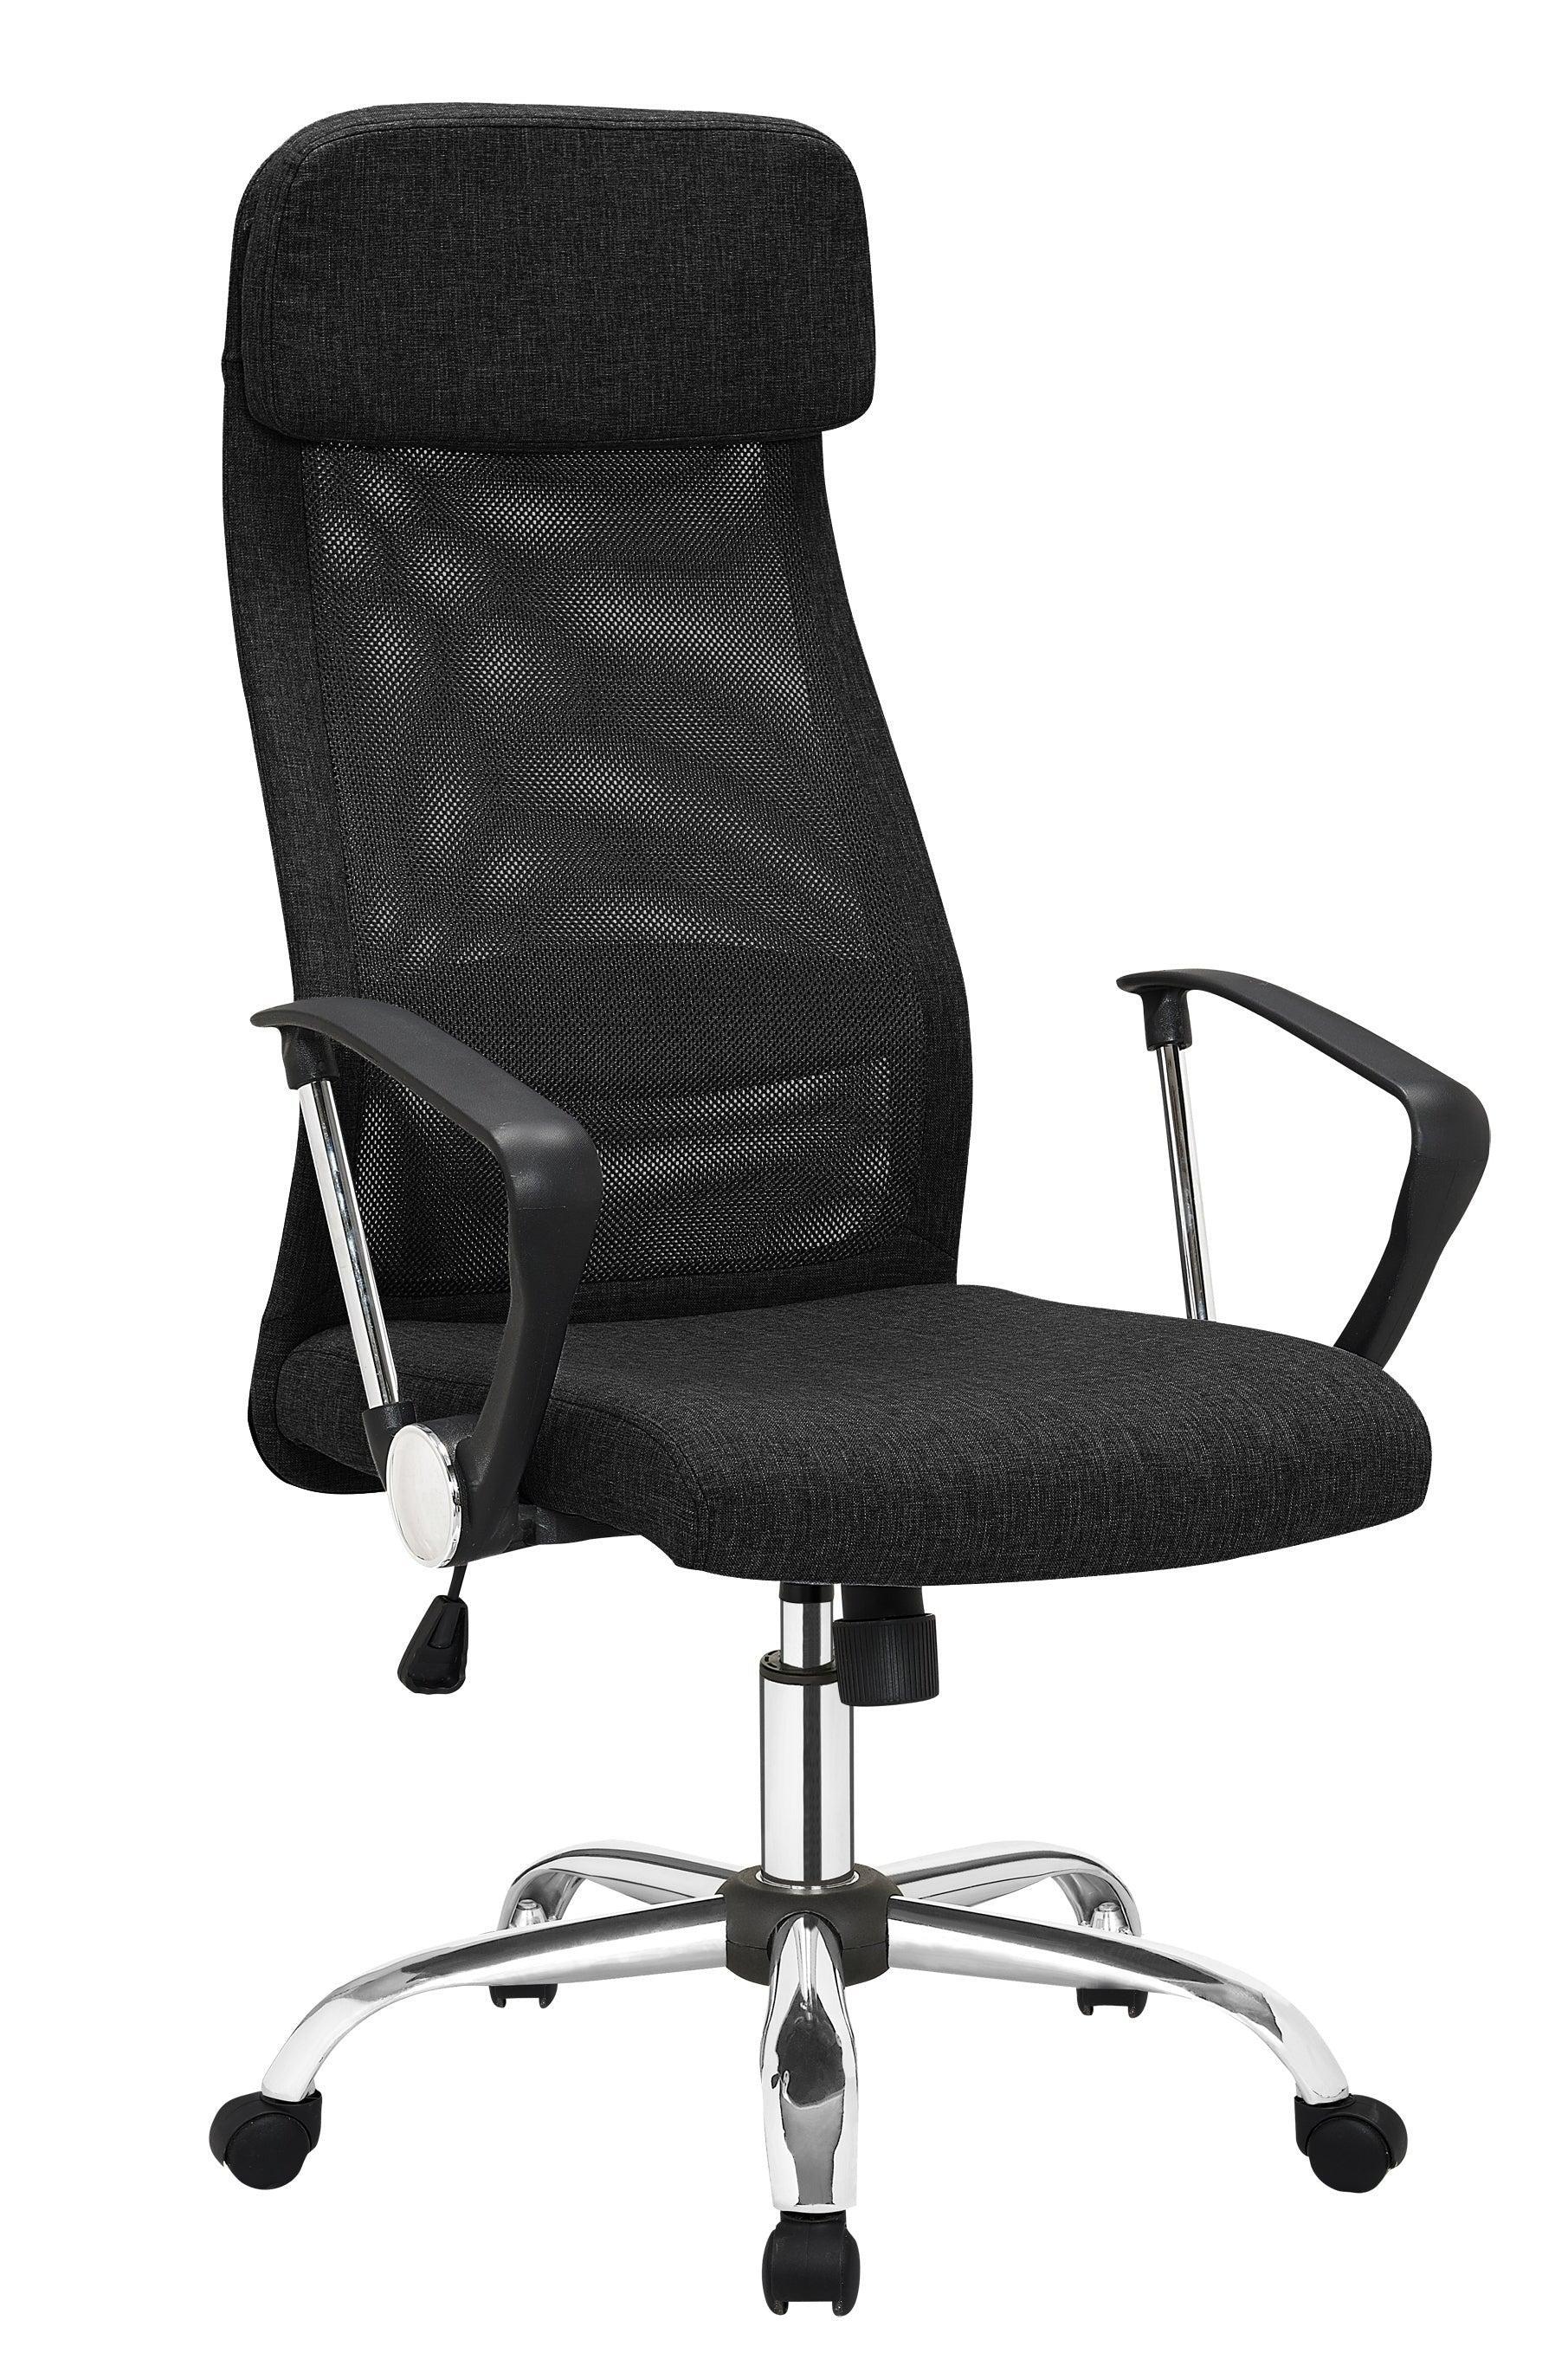 Foret Seat High Back Executive Mesh Home Office Game Chair Computer Breathable Lumbar Support Swivel Lift